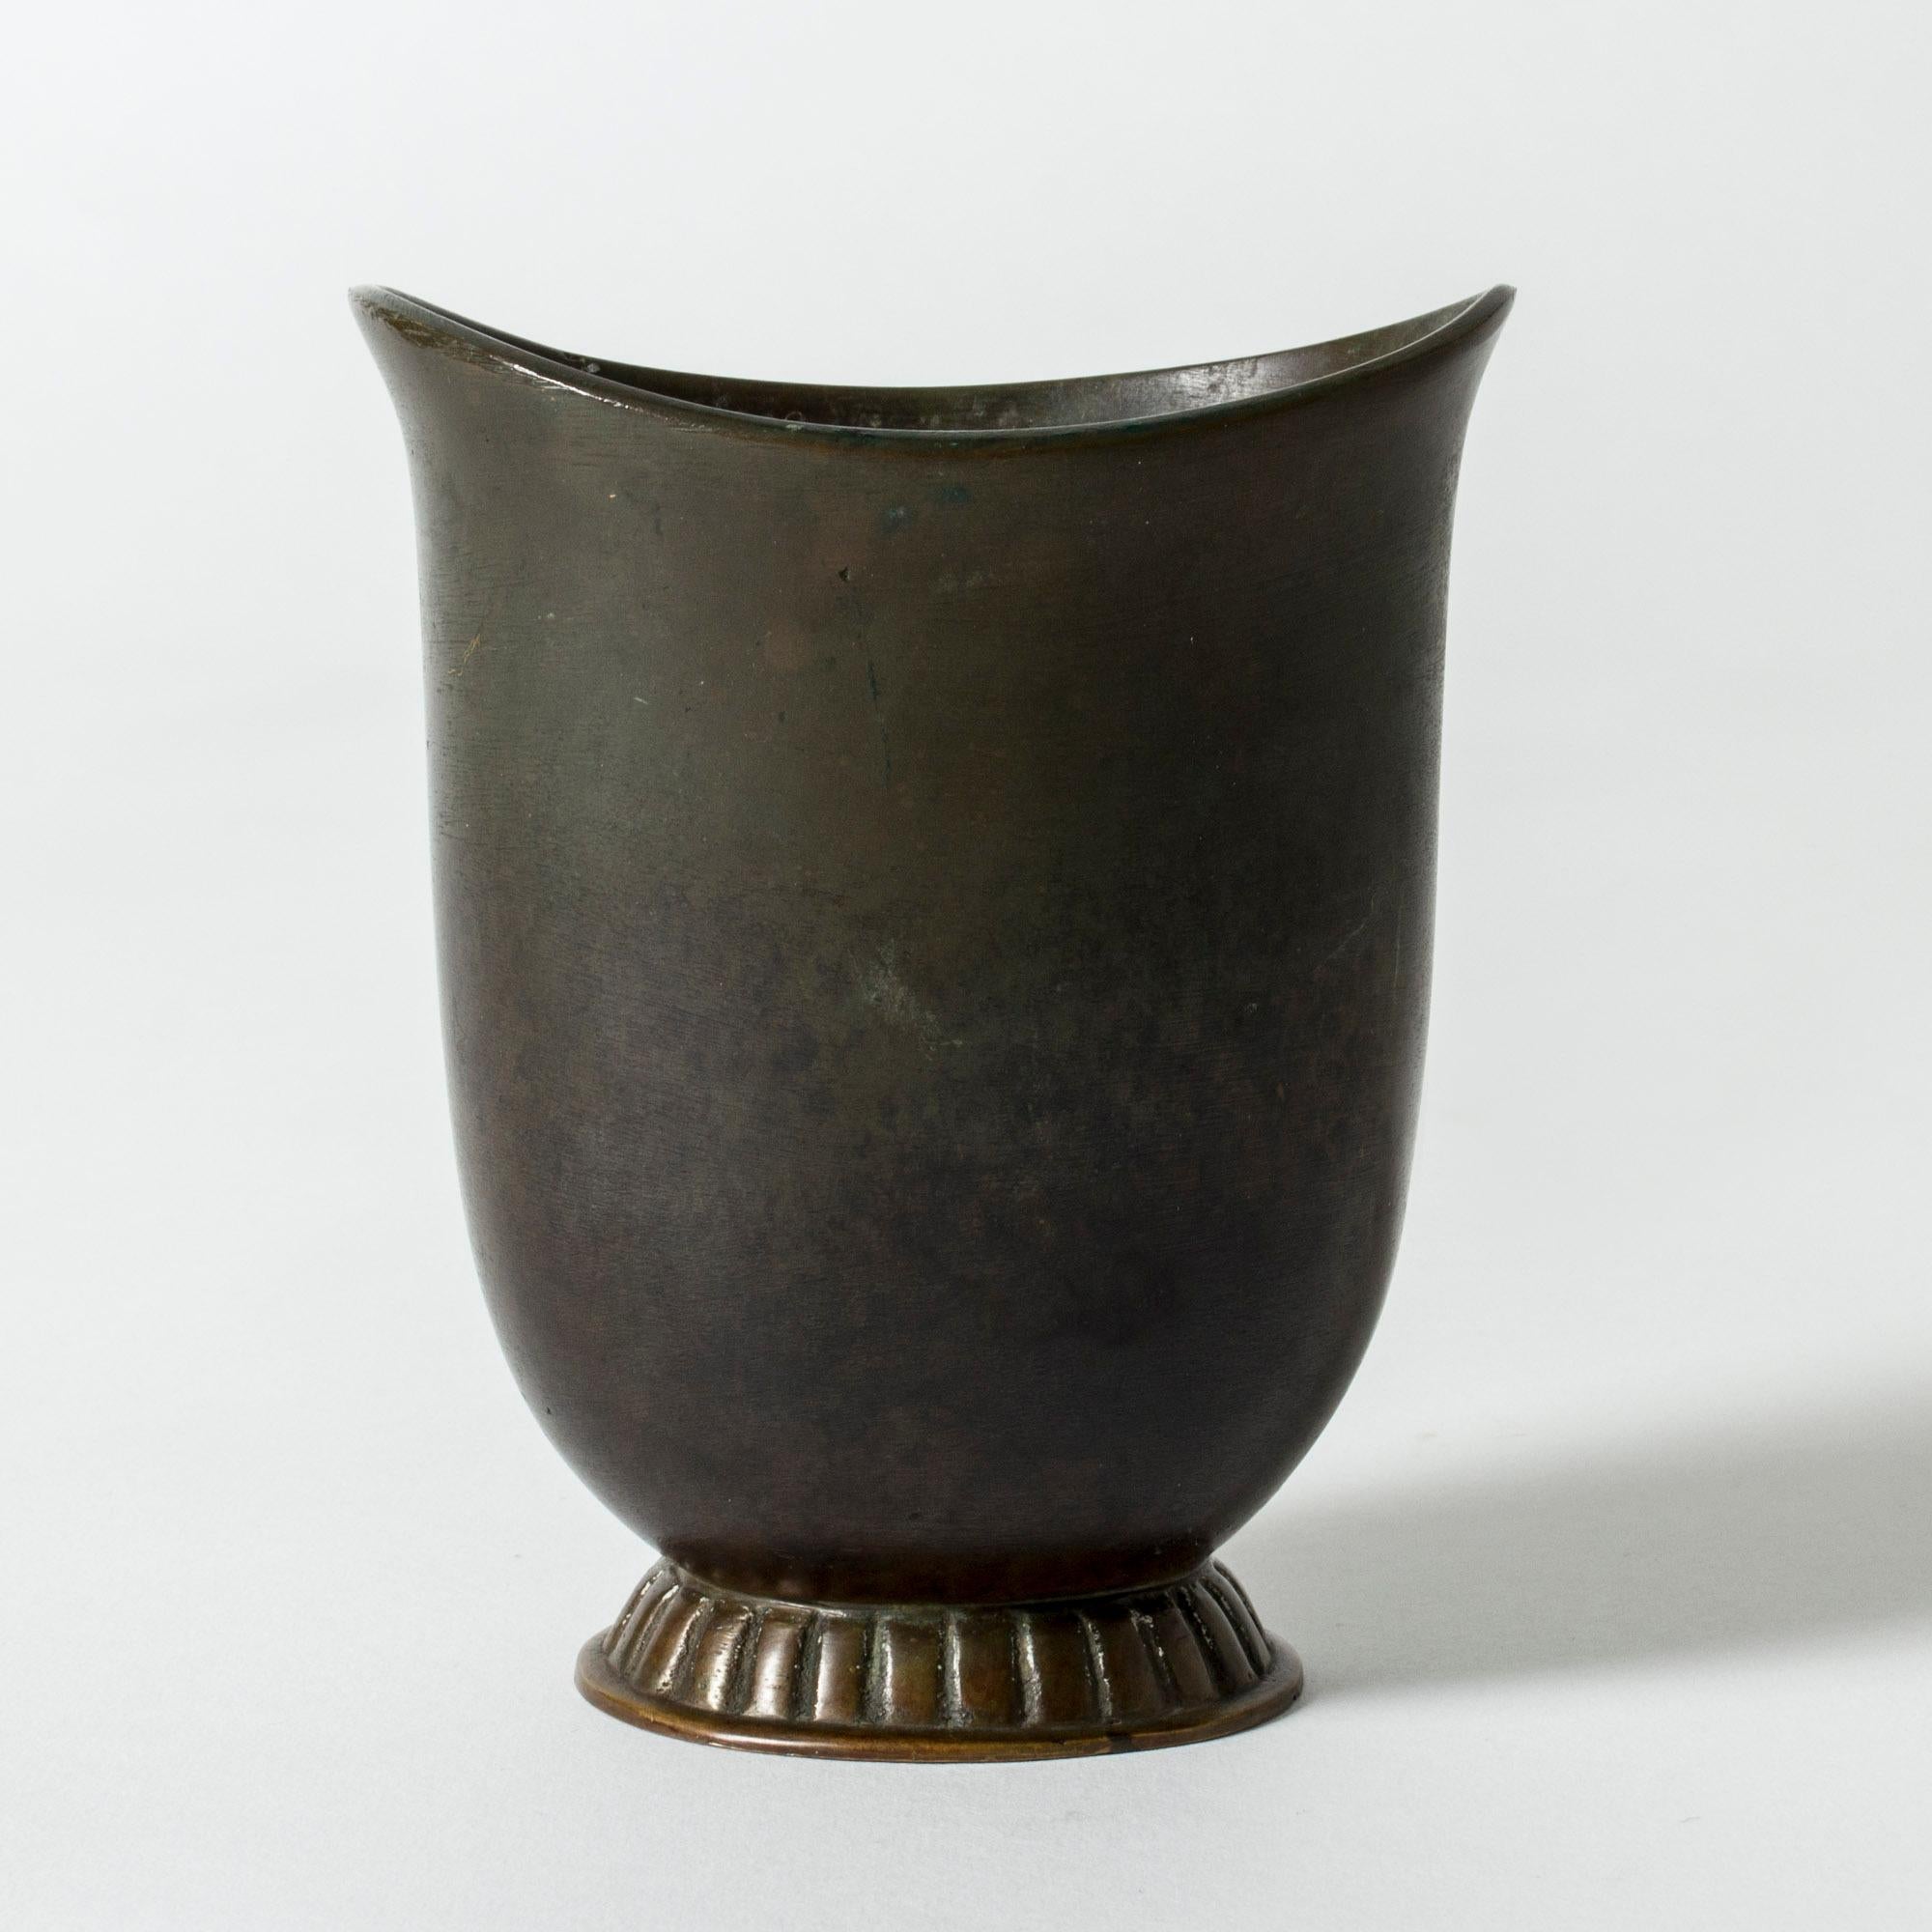 Elegant, small bronze vase from GAB, patinated dark green. Large mouth makes it great for a bouquet of flowers. The ornate base breaks off the strict design.

GAB was founded in Stockholm in 1867 and was an important influence on the Swedish art